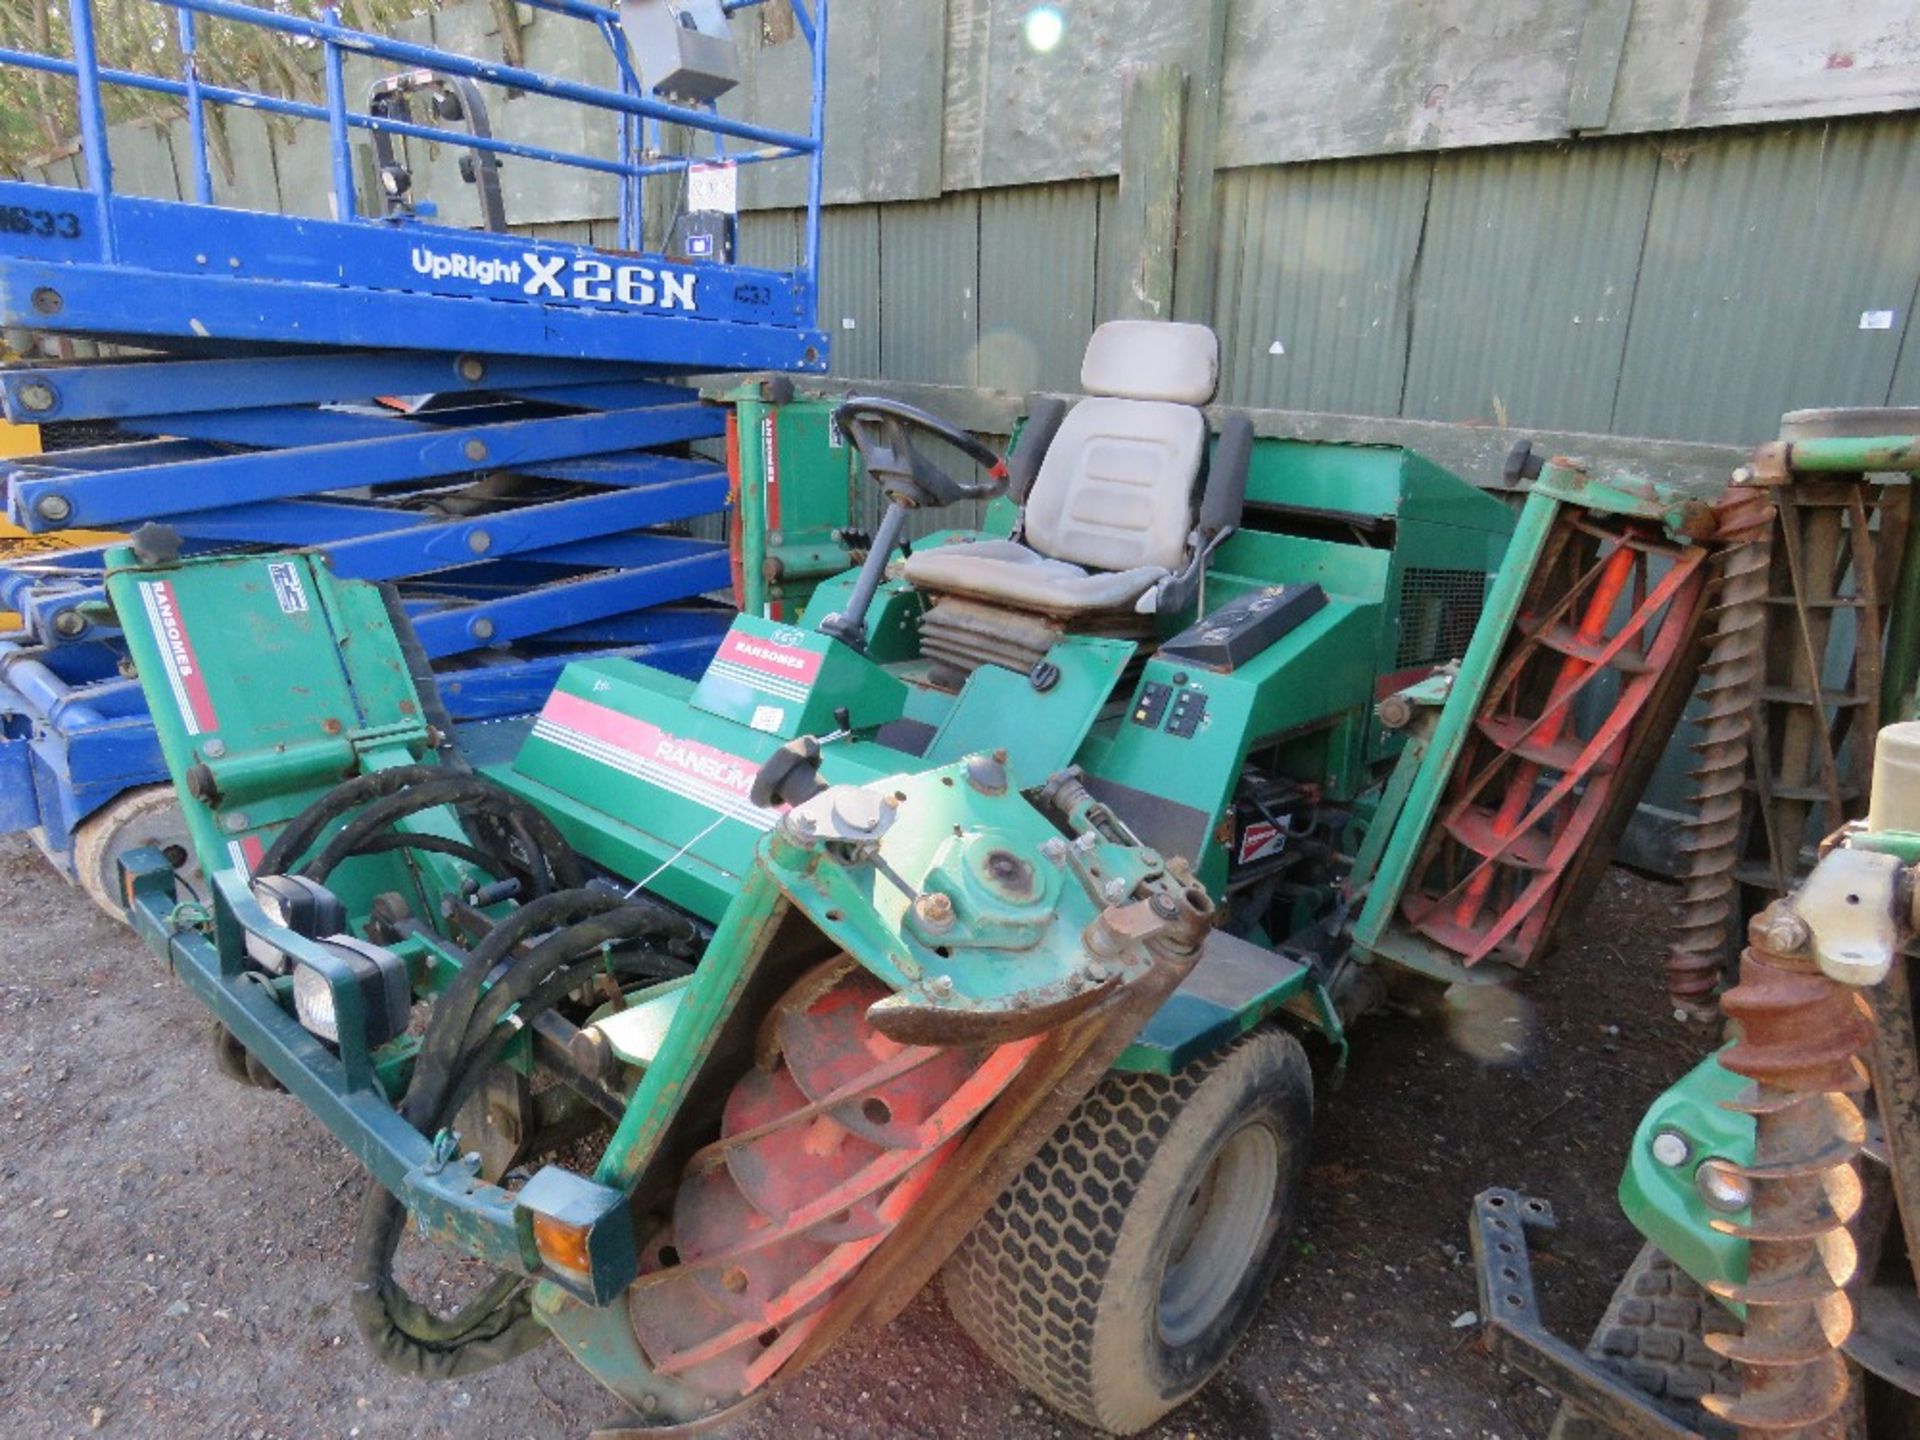 RANSOMES COMMANDER 3510 51HP 5 GANG MOWER. WHEN TESTED WAS SEEN TO RUN, DRIVE AND MOWERS TURNED.